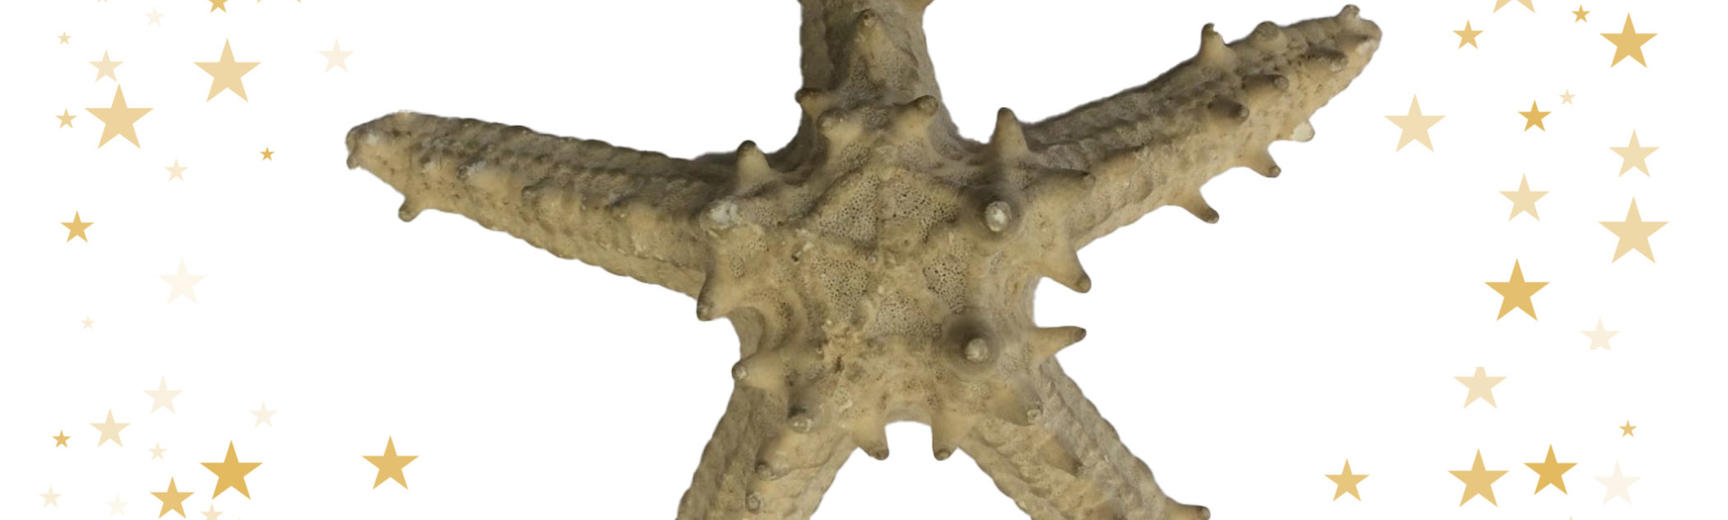 An image of a starfish specimen against a white background, with stars around the edges of the image